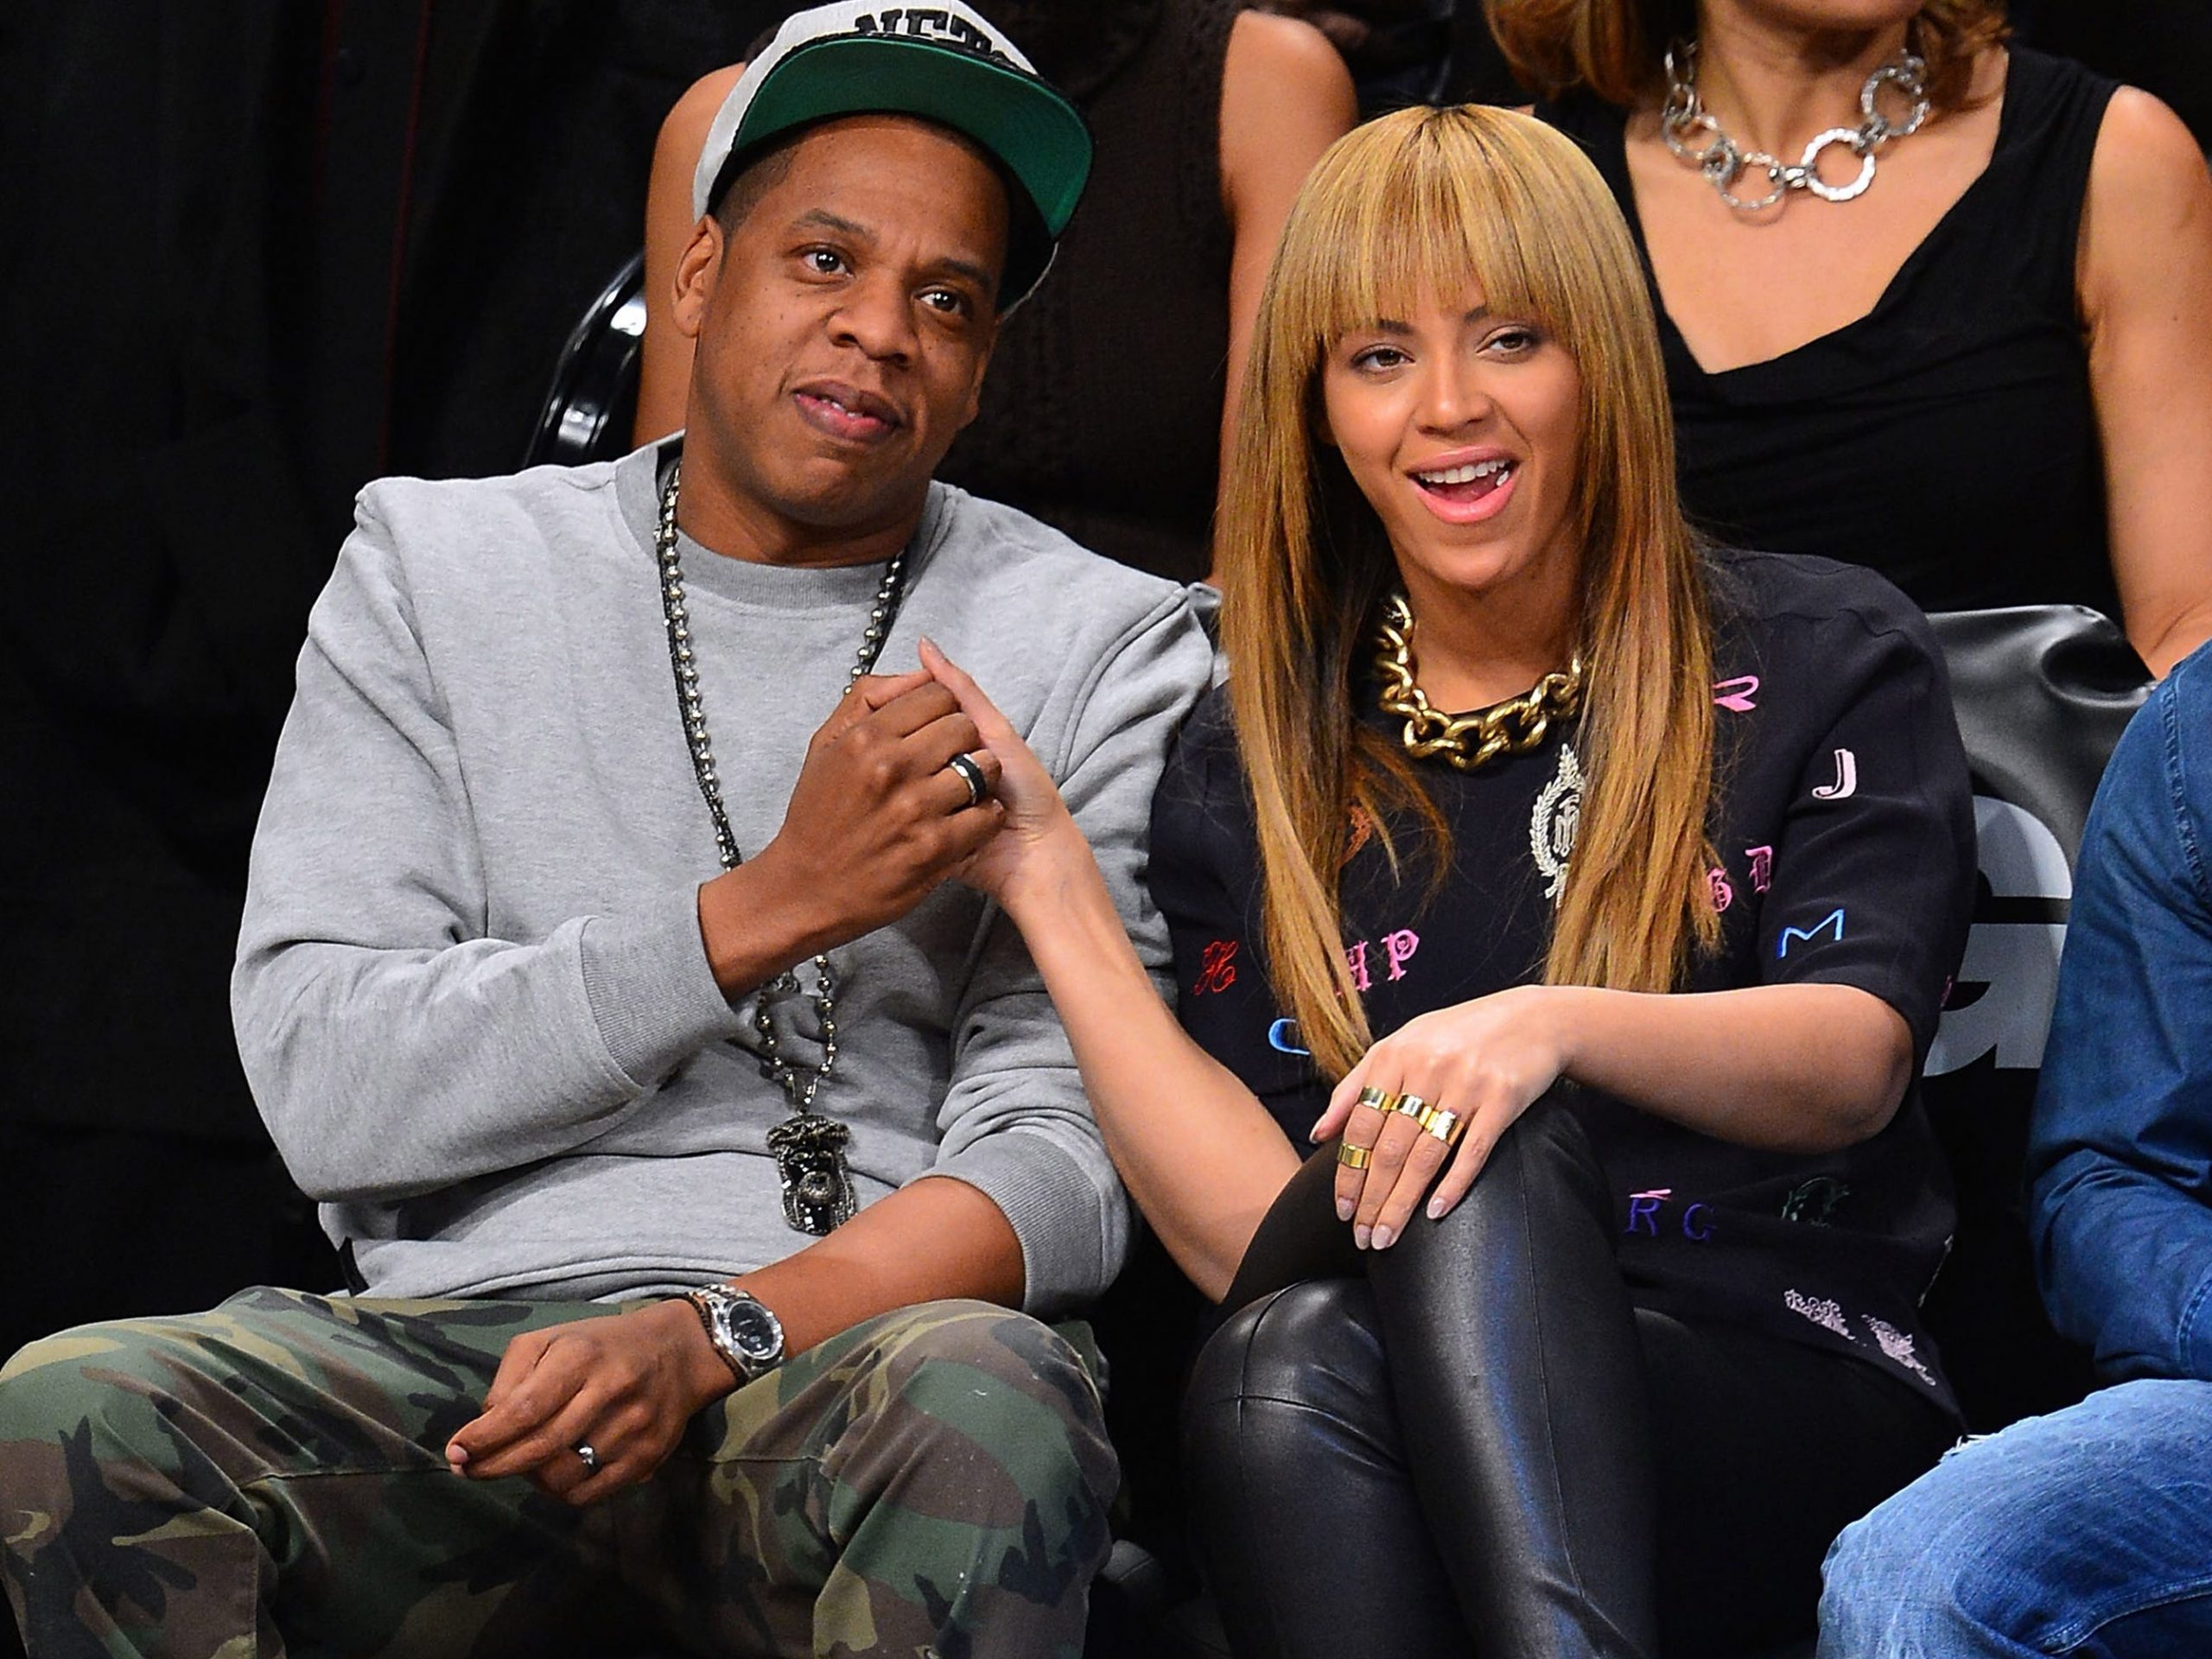 beyonce and jay z backetball game 